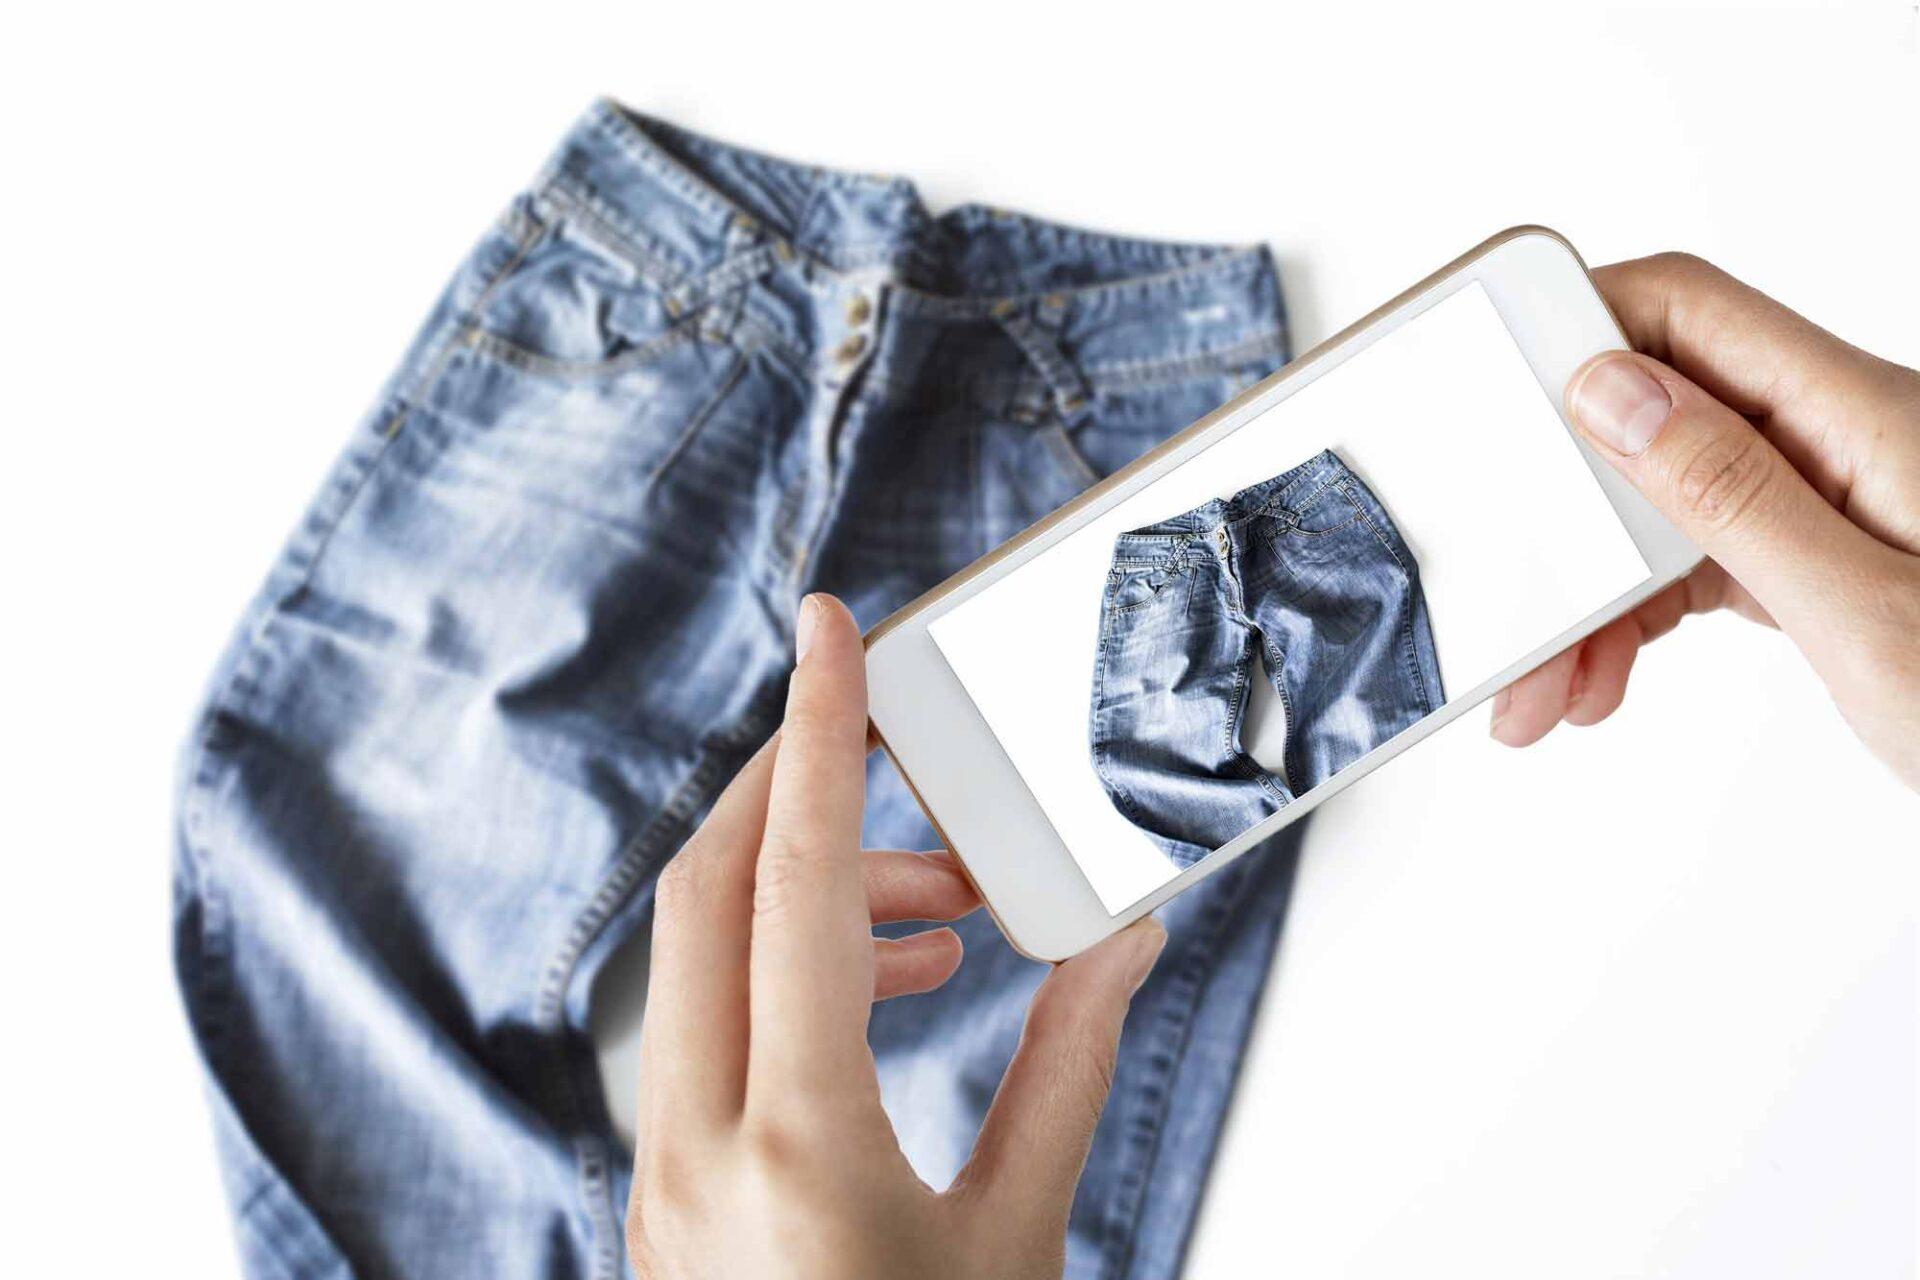 Top tips on how to sell your gently used clothing online